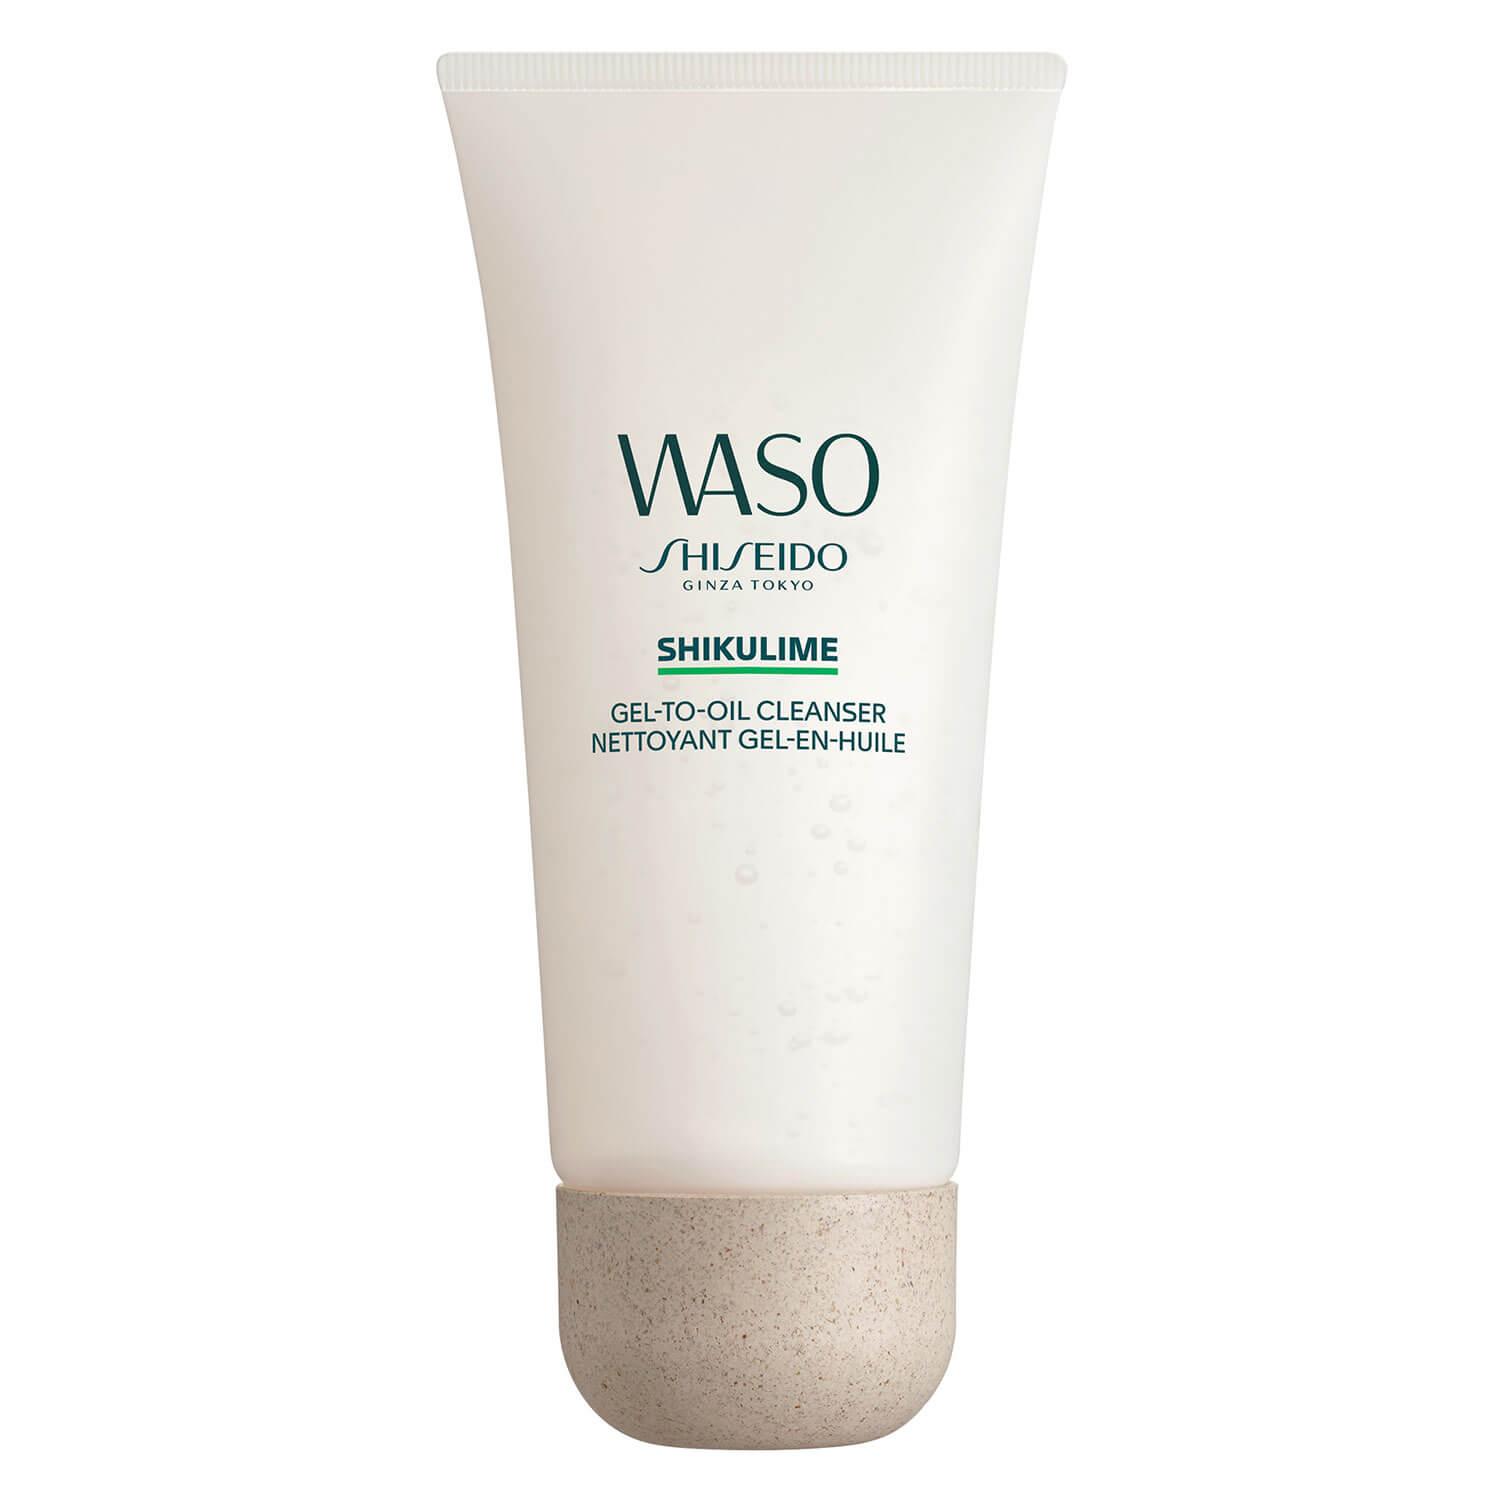 Waso - Shikulime Gel-to-Oil Cleanser